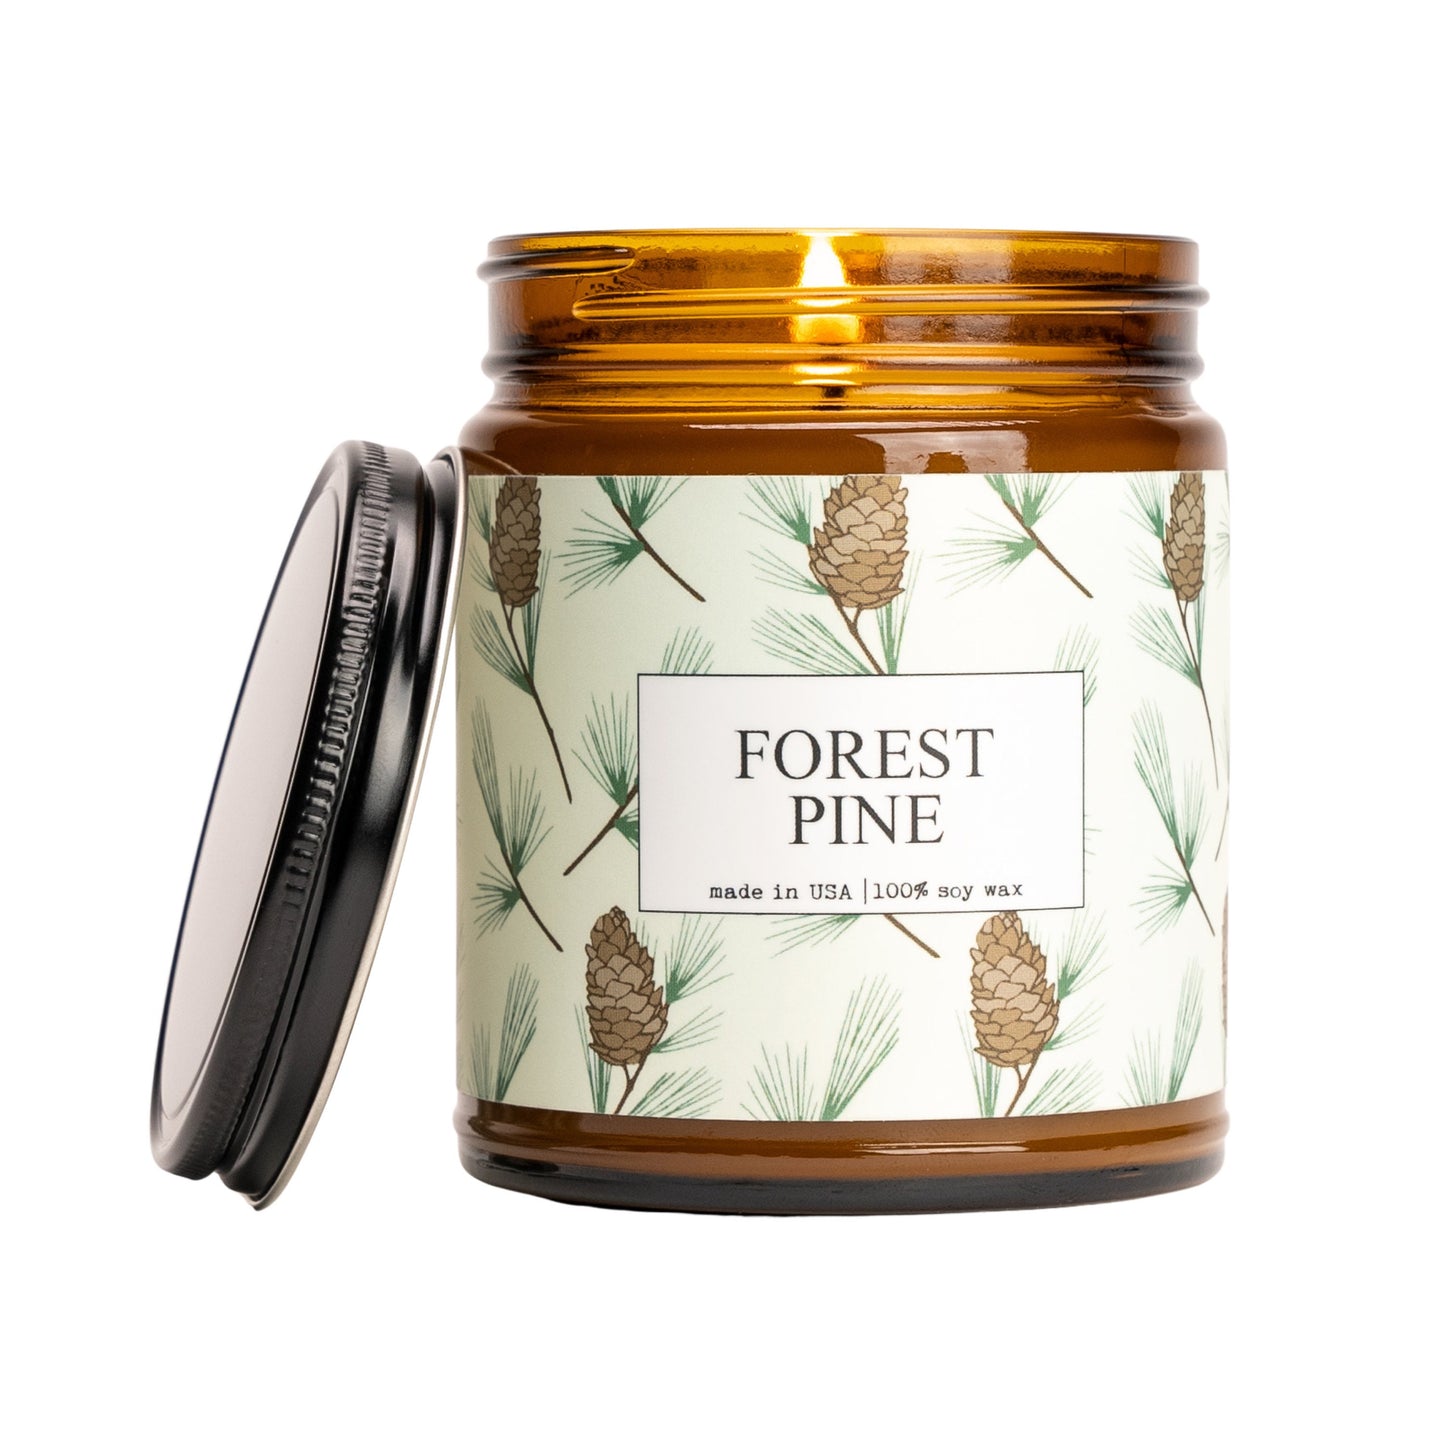 Forest Pine Scented Candle - 9oz Glass Jar Soy Candle